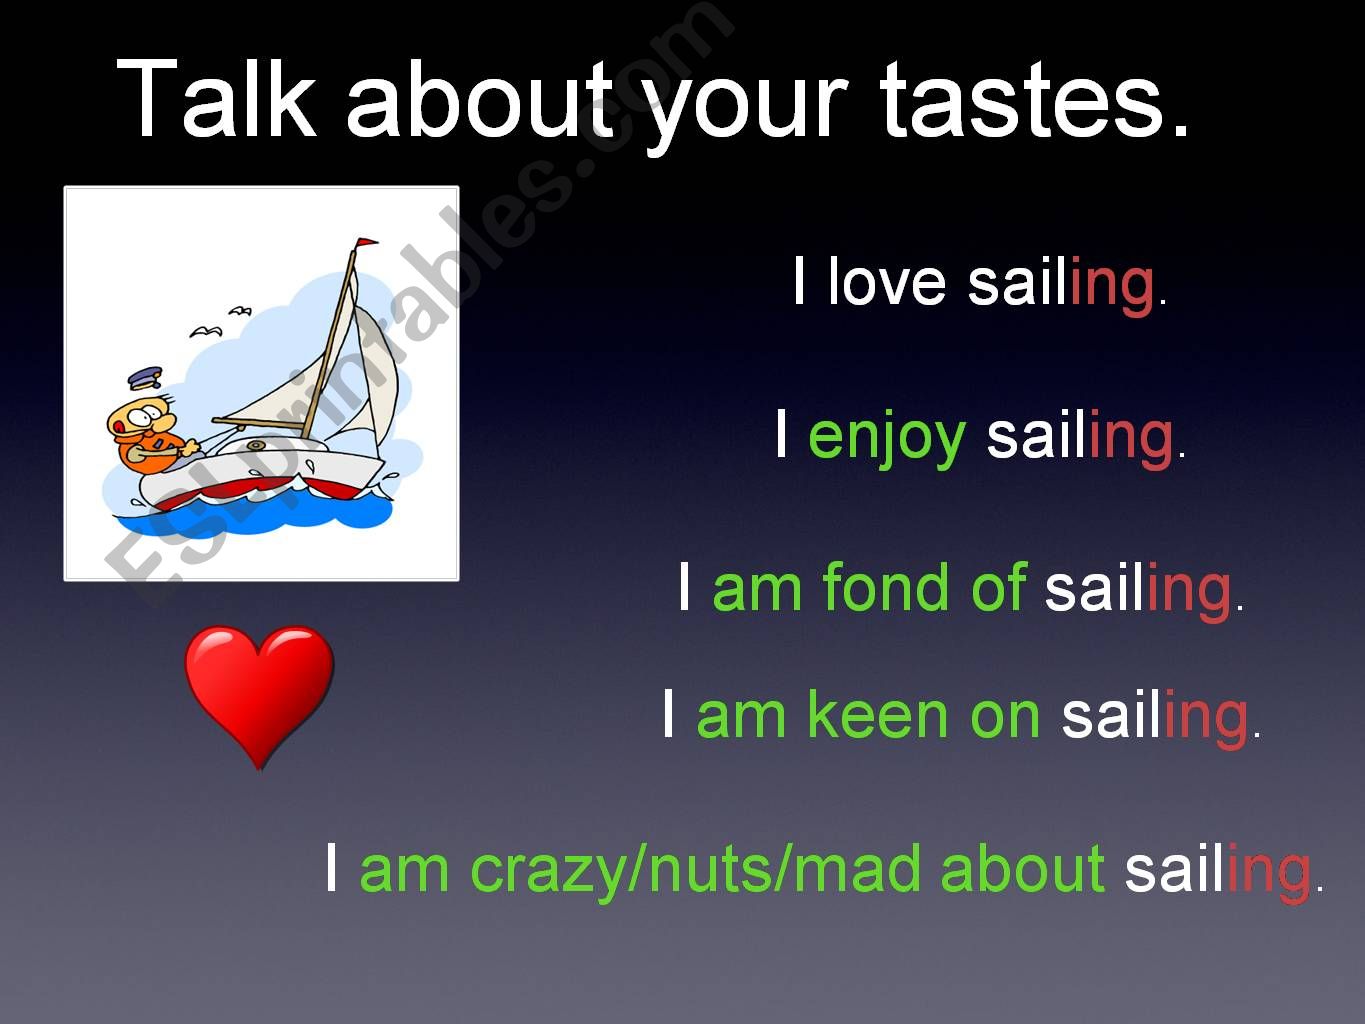 Talk about your tastes powerpoint